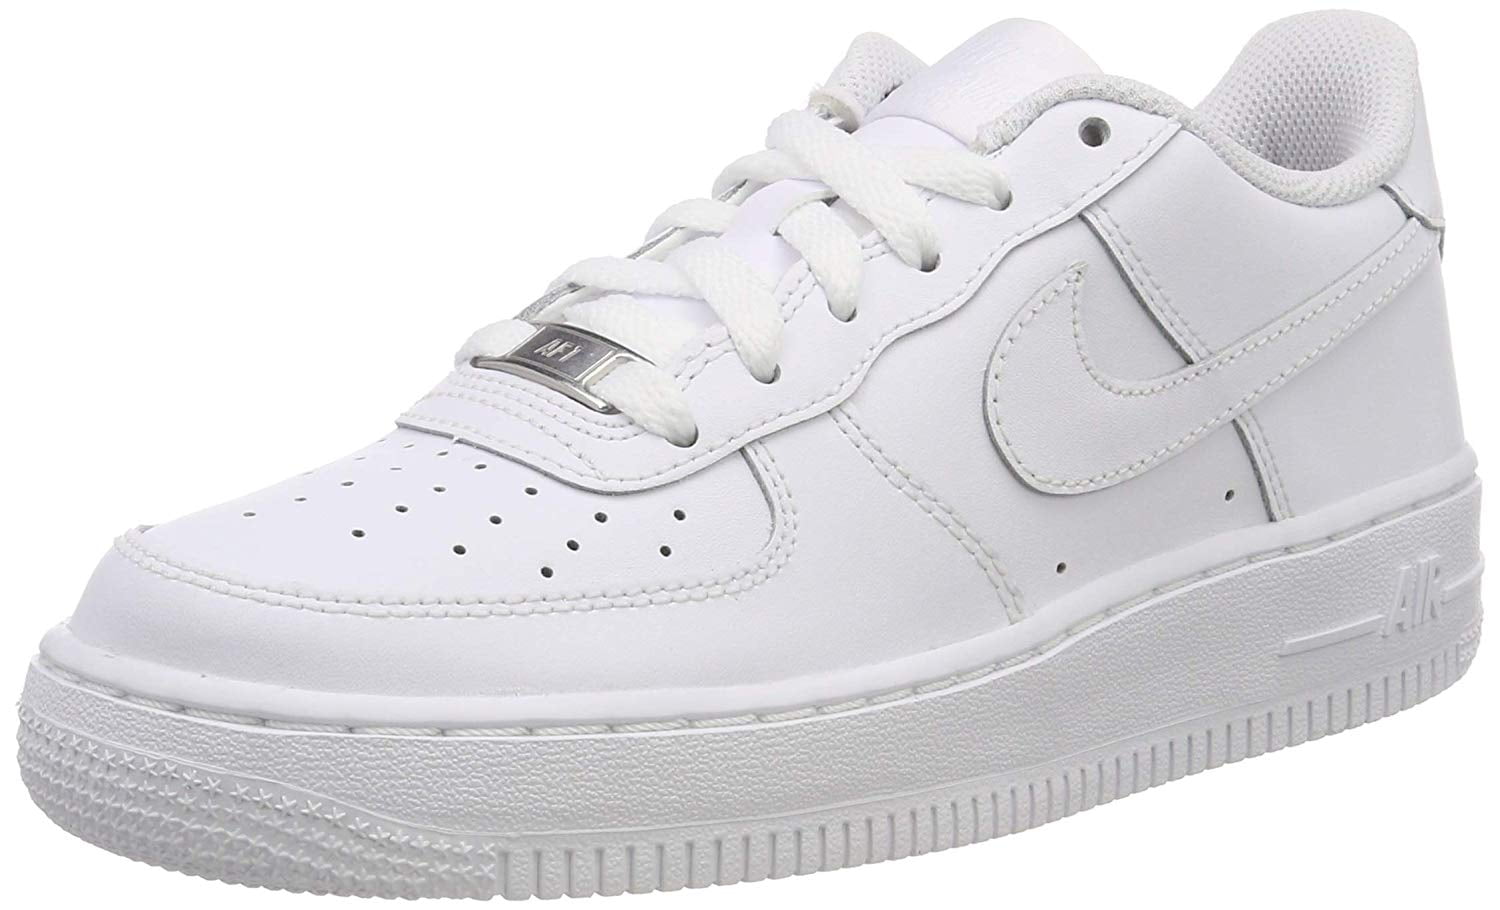 nike air force one front